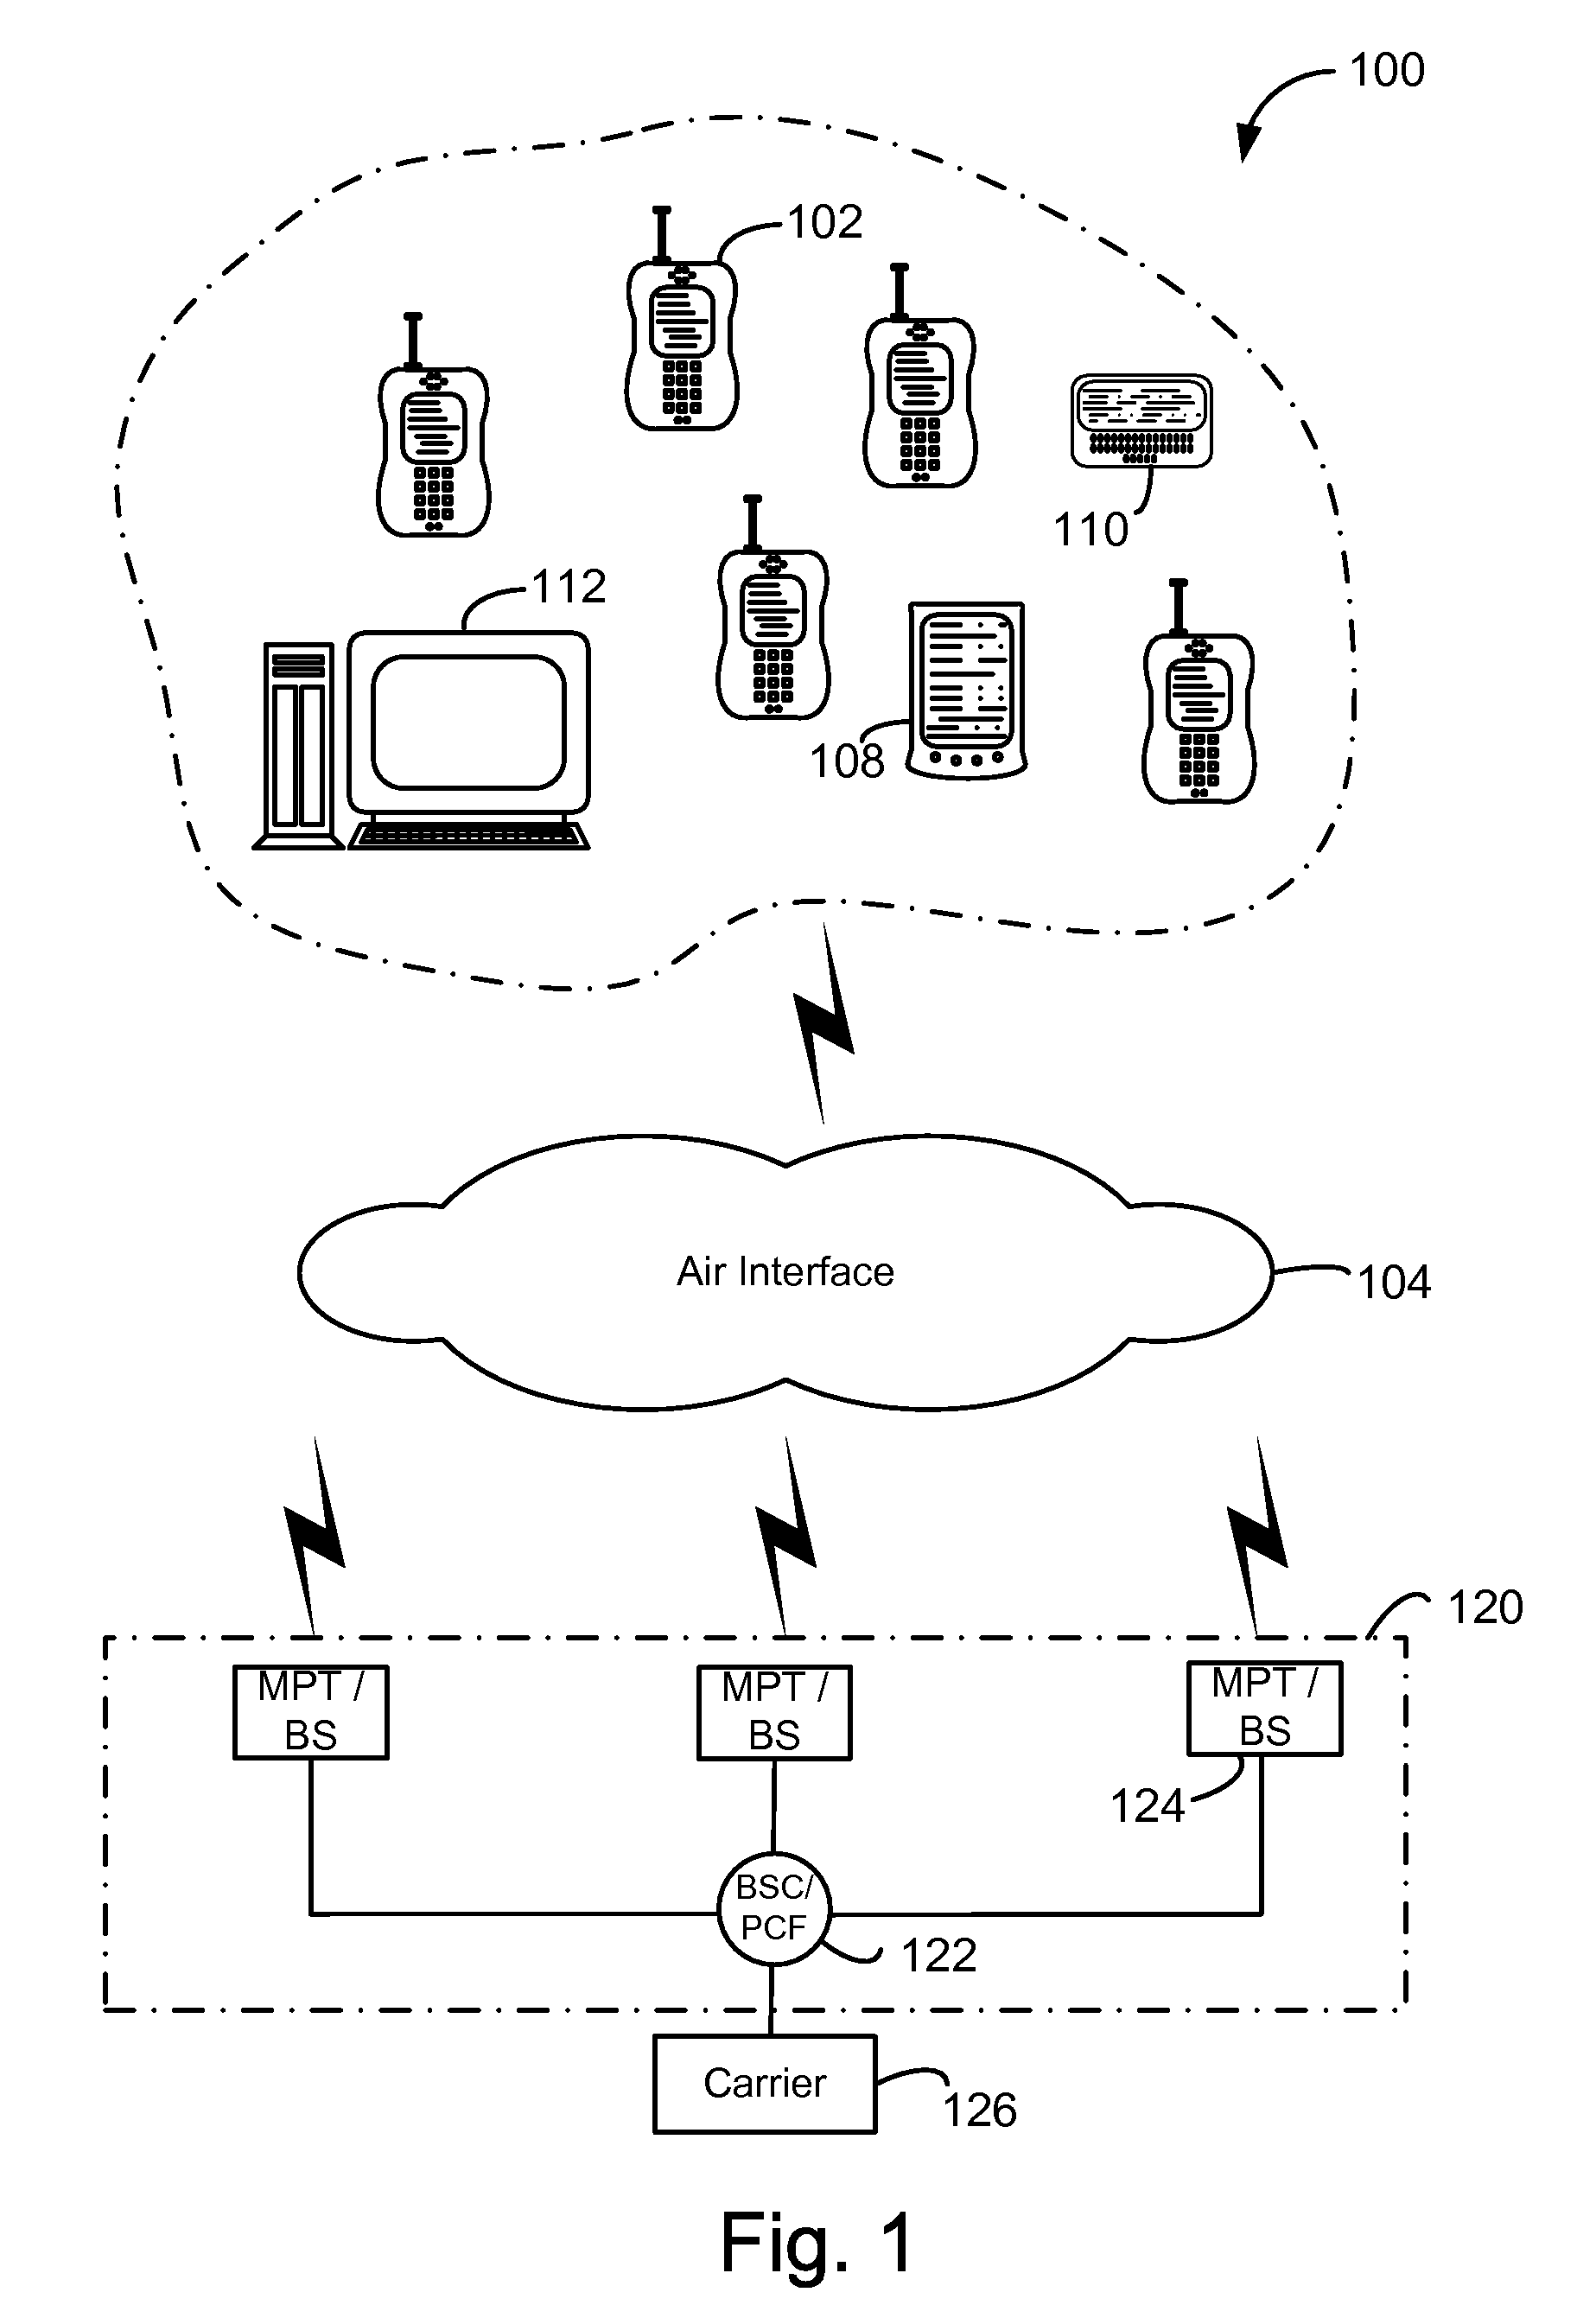 Multicast messaging within a wireless communication system